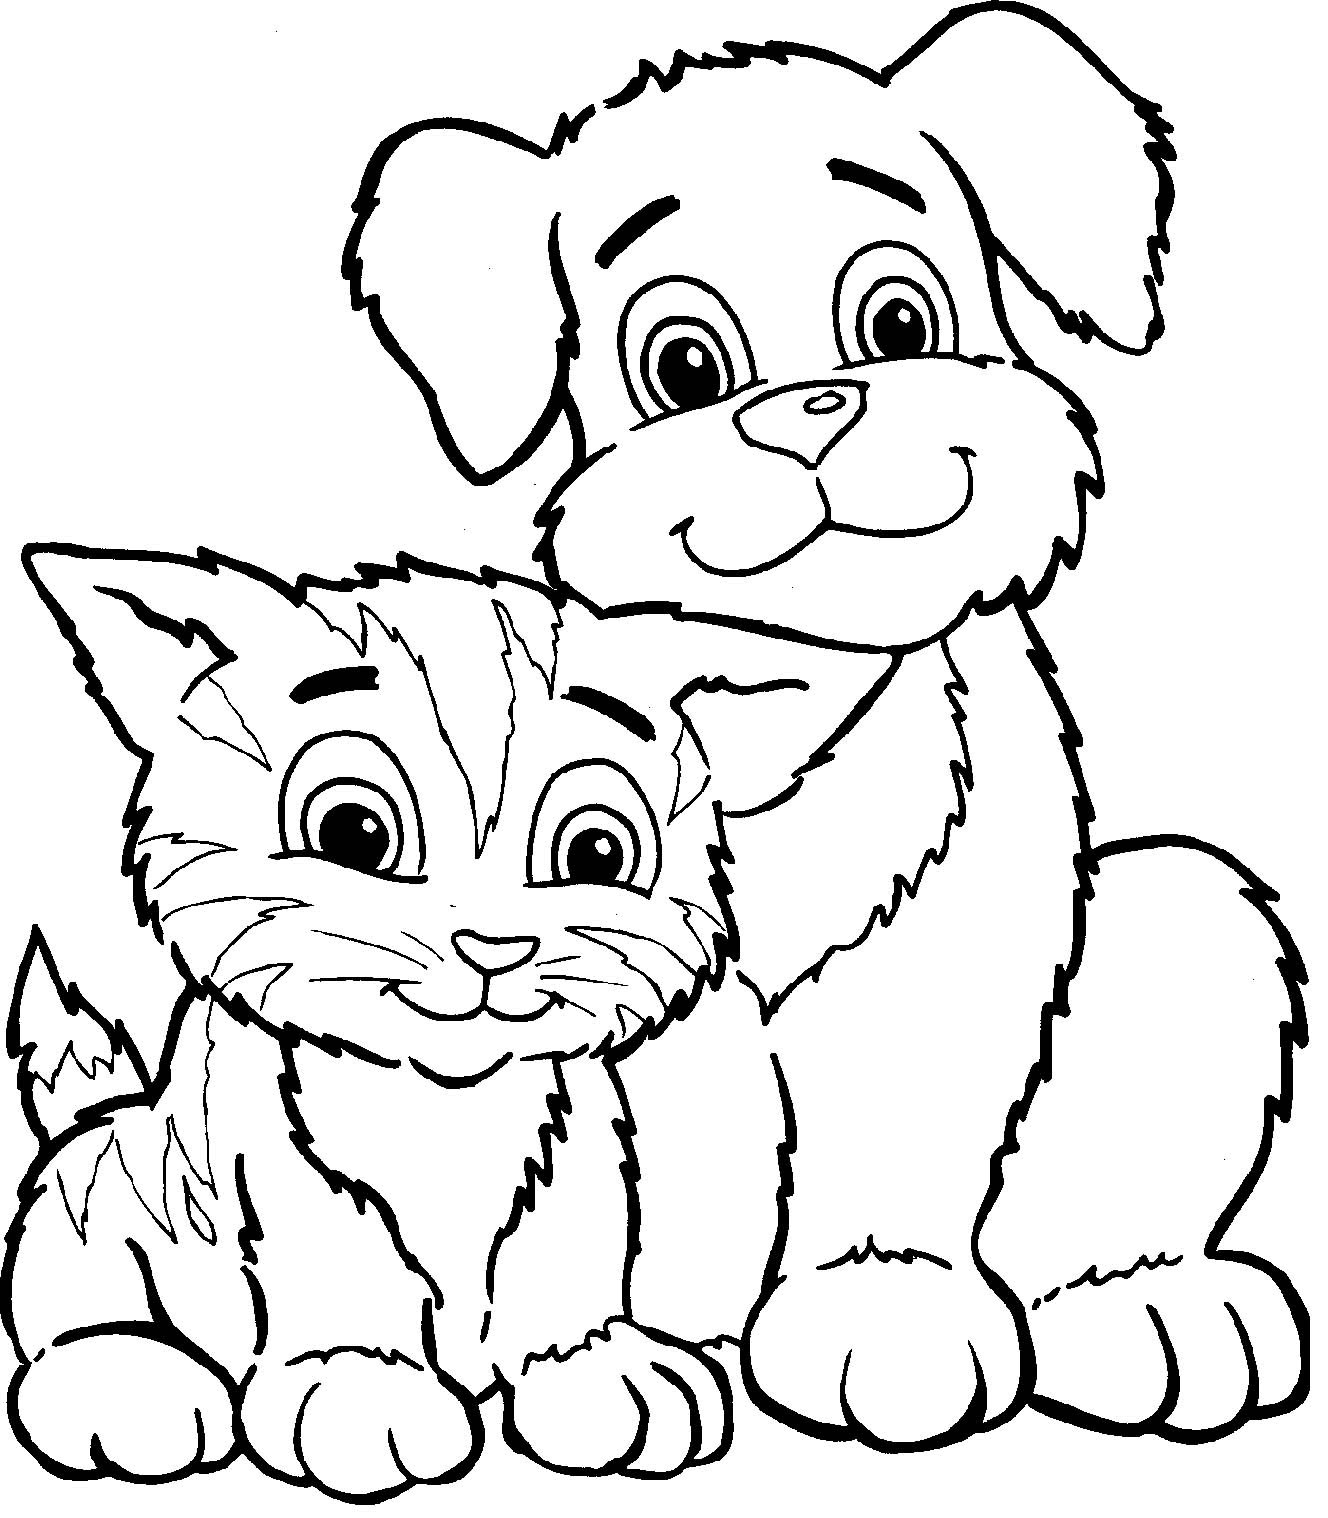 Cat and Dog Coloring Pages Wallpaper